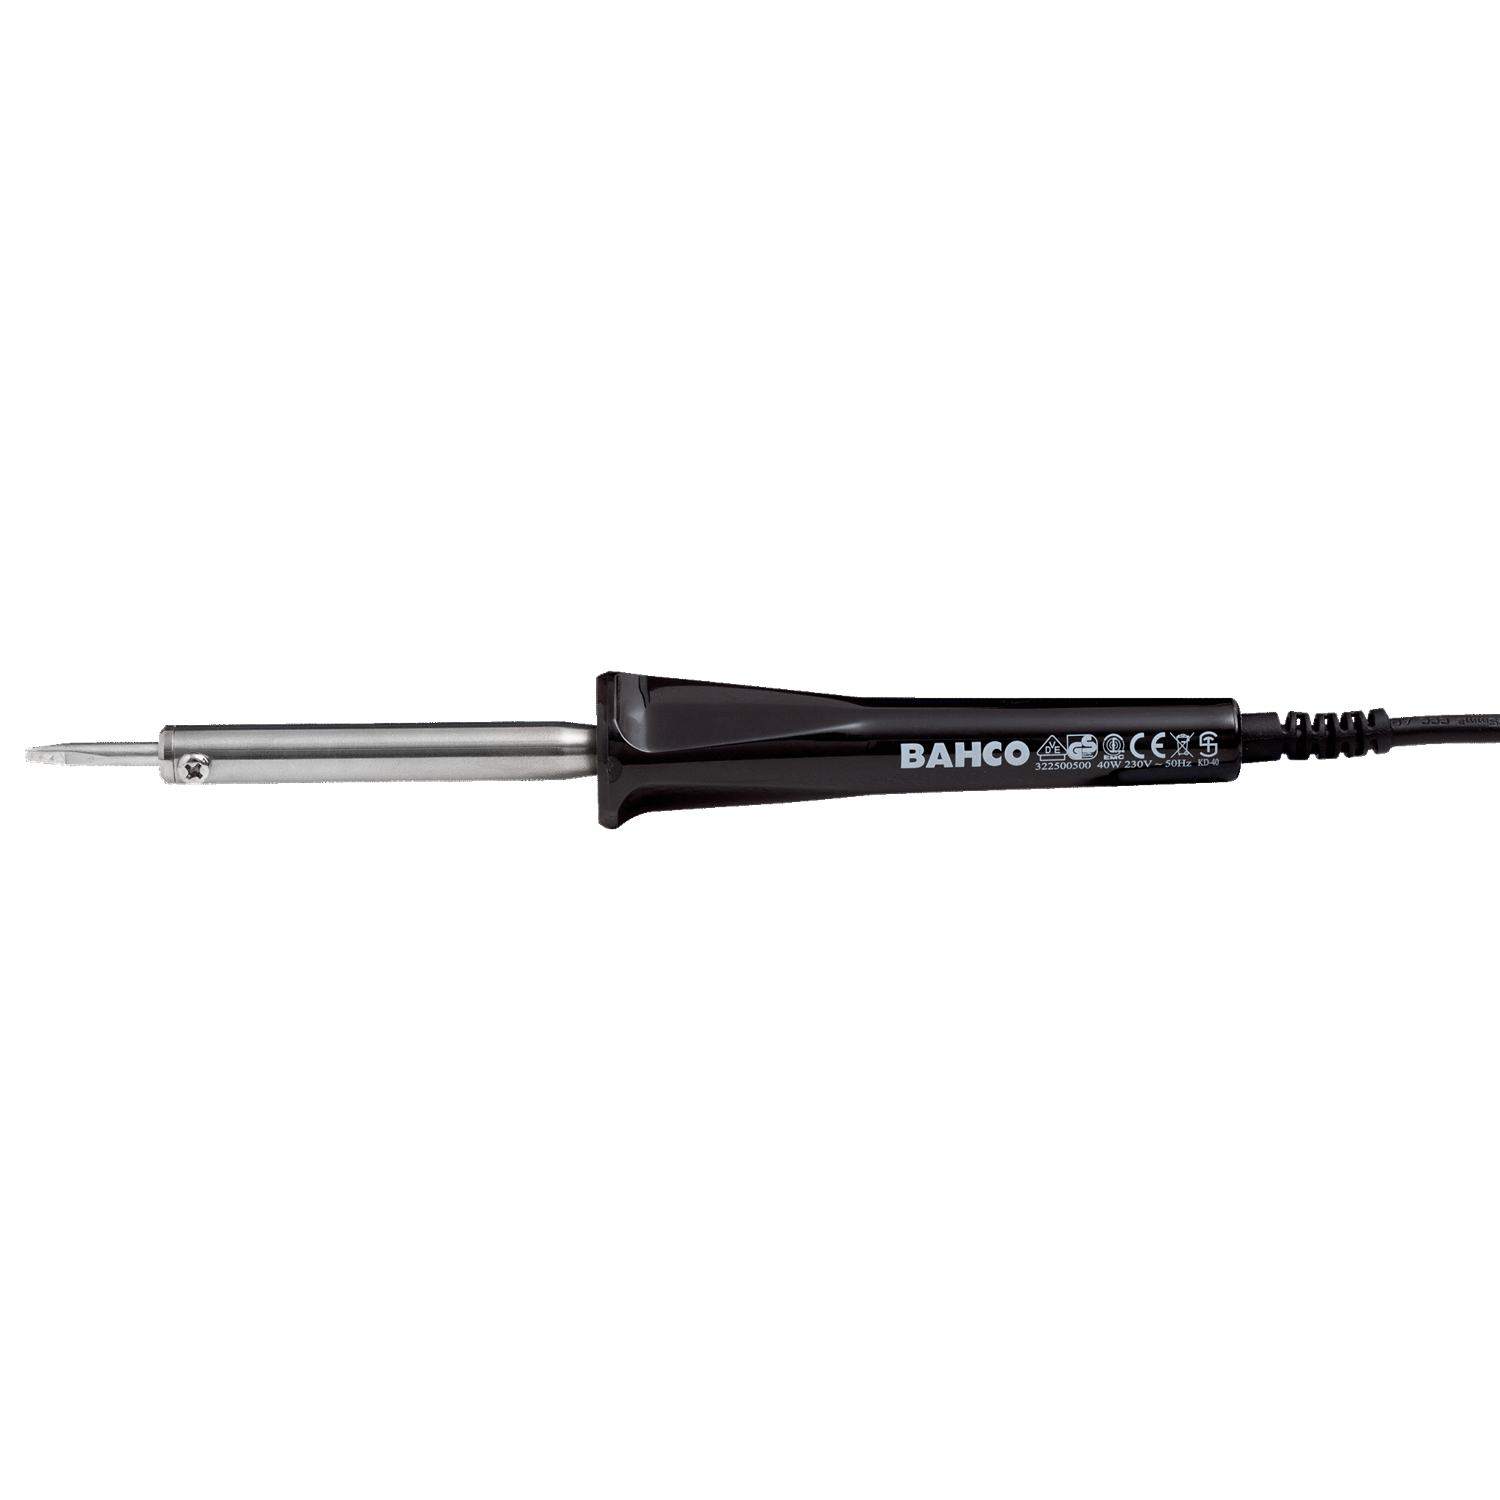 BAHCO 322500 Heavy-Duty Soldering Tools Irons 30 W, 40 W, 80 W - Premium Soldering Tools from BAHCO - Shop now at Yew Aik.